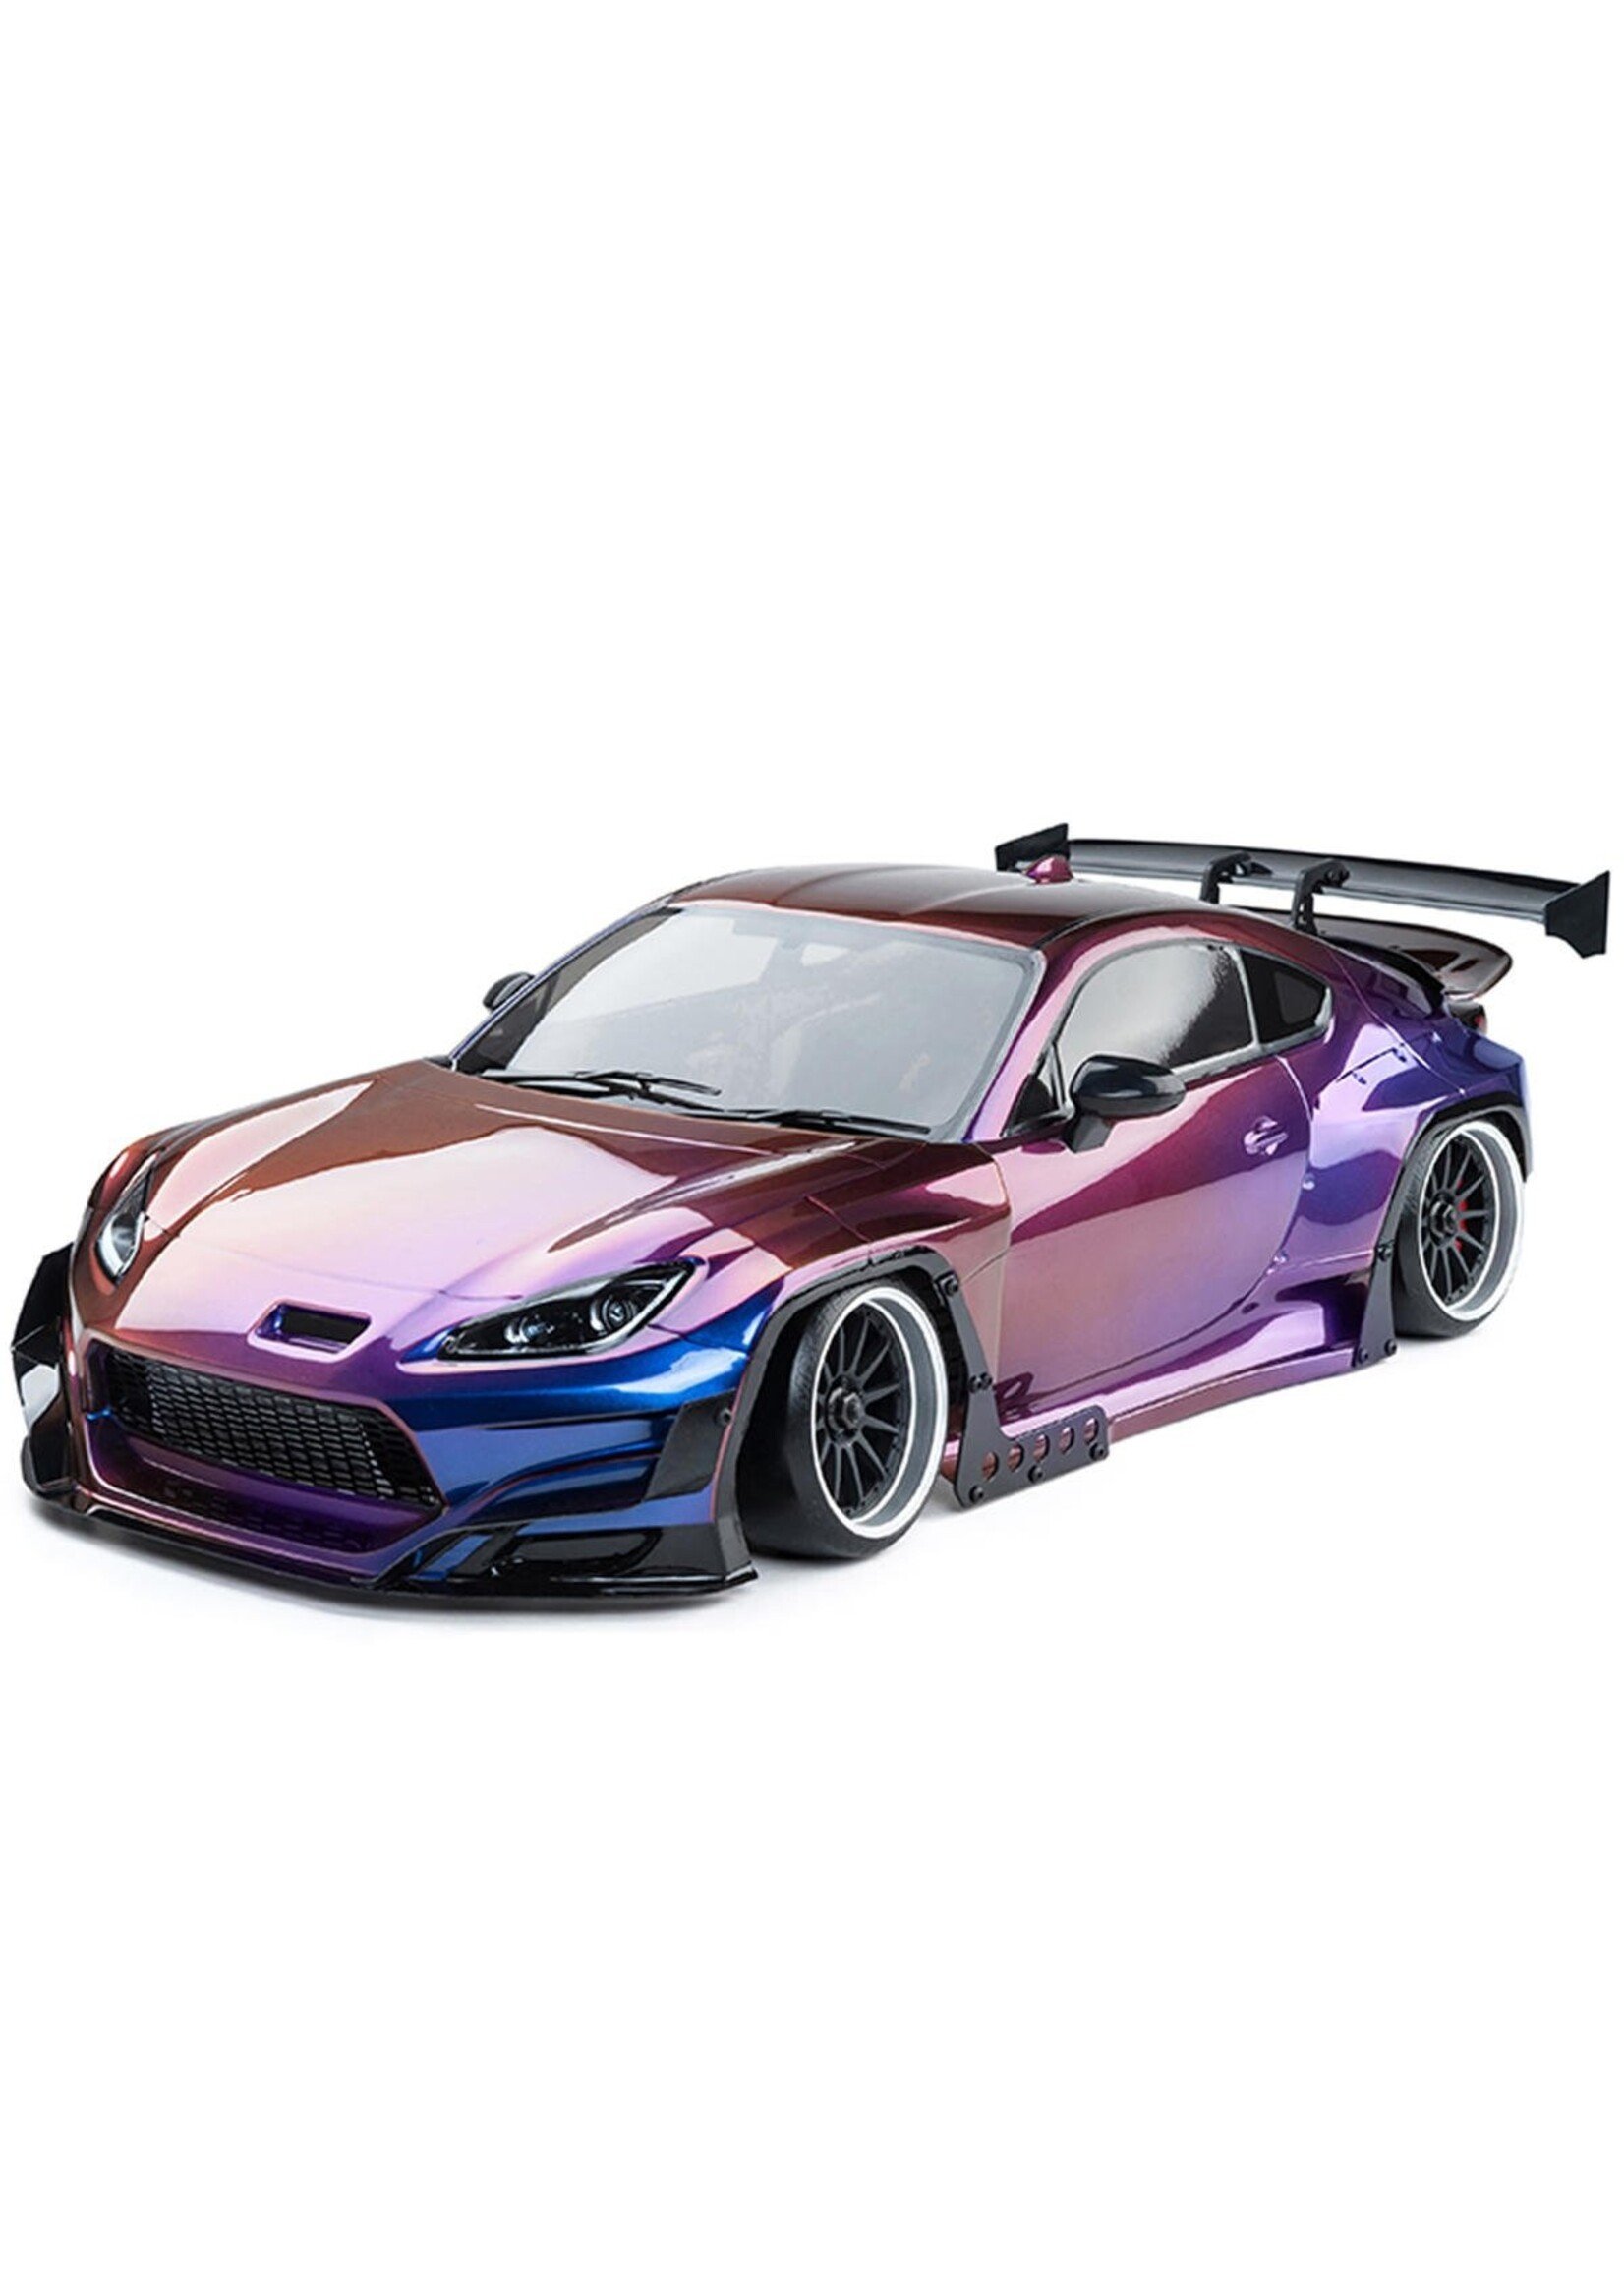 MST 1/10 MST RMX 2.5 2WD Brushless Drift Car With GR86RB Body, RTR - Purple